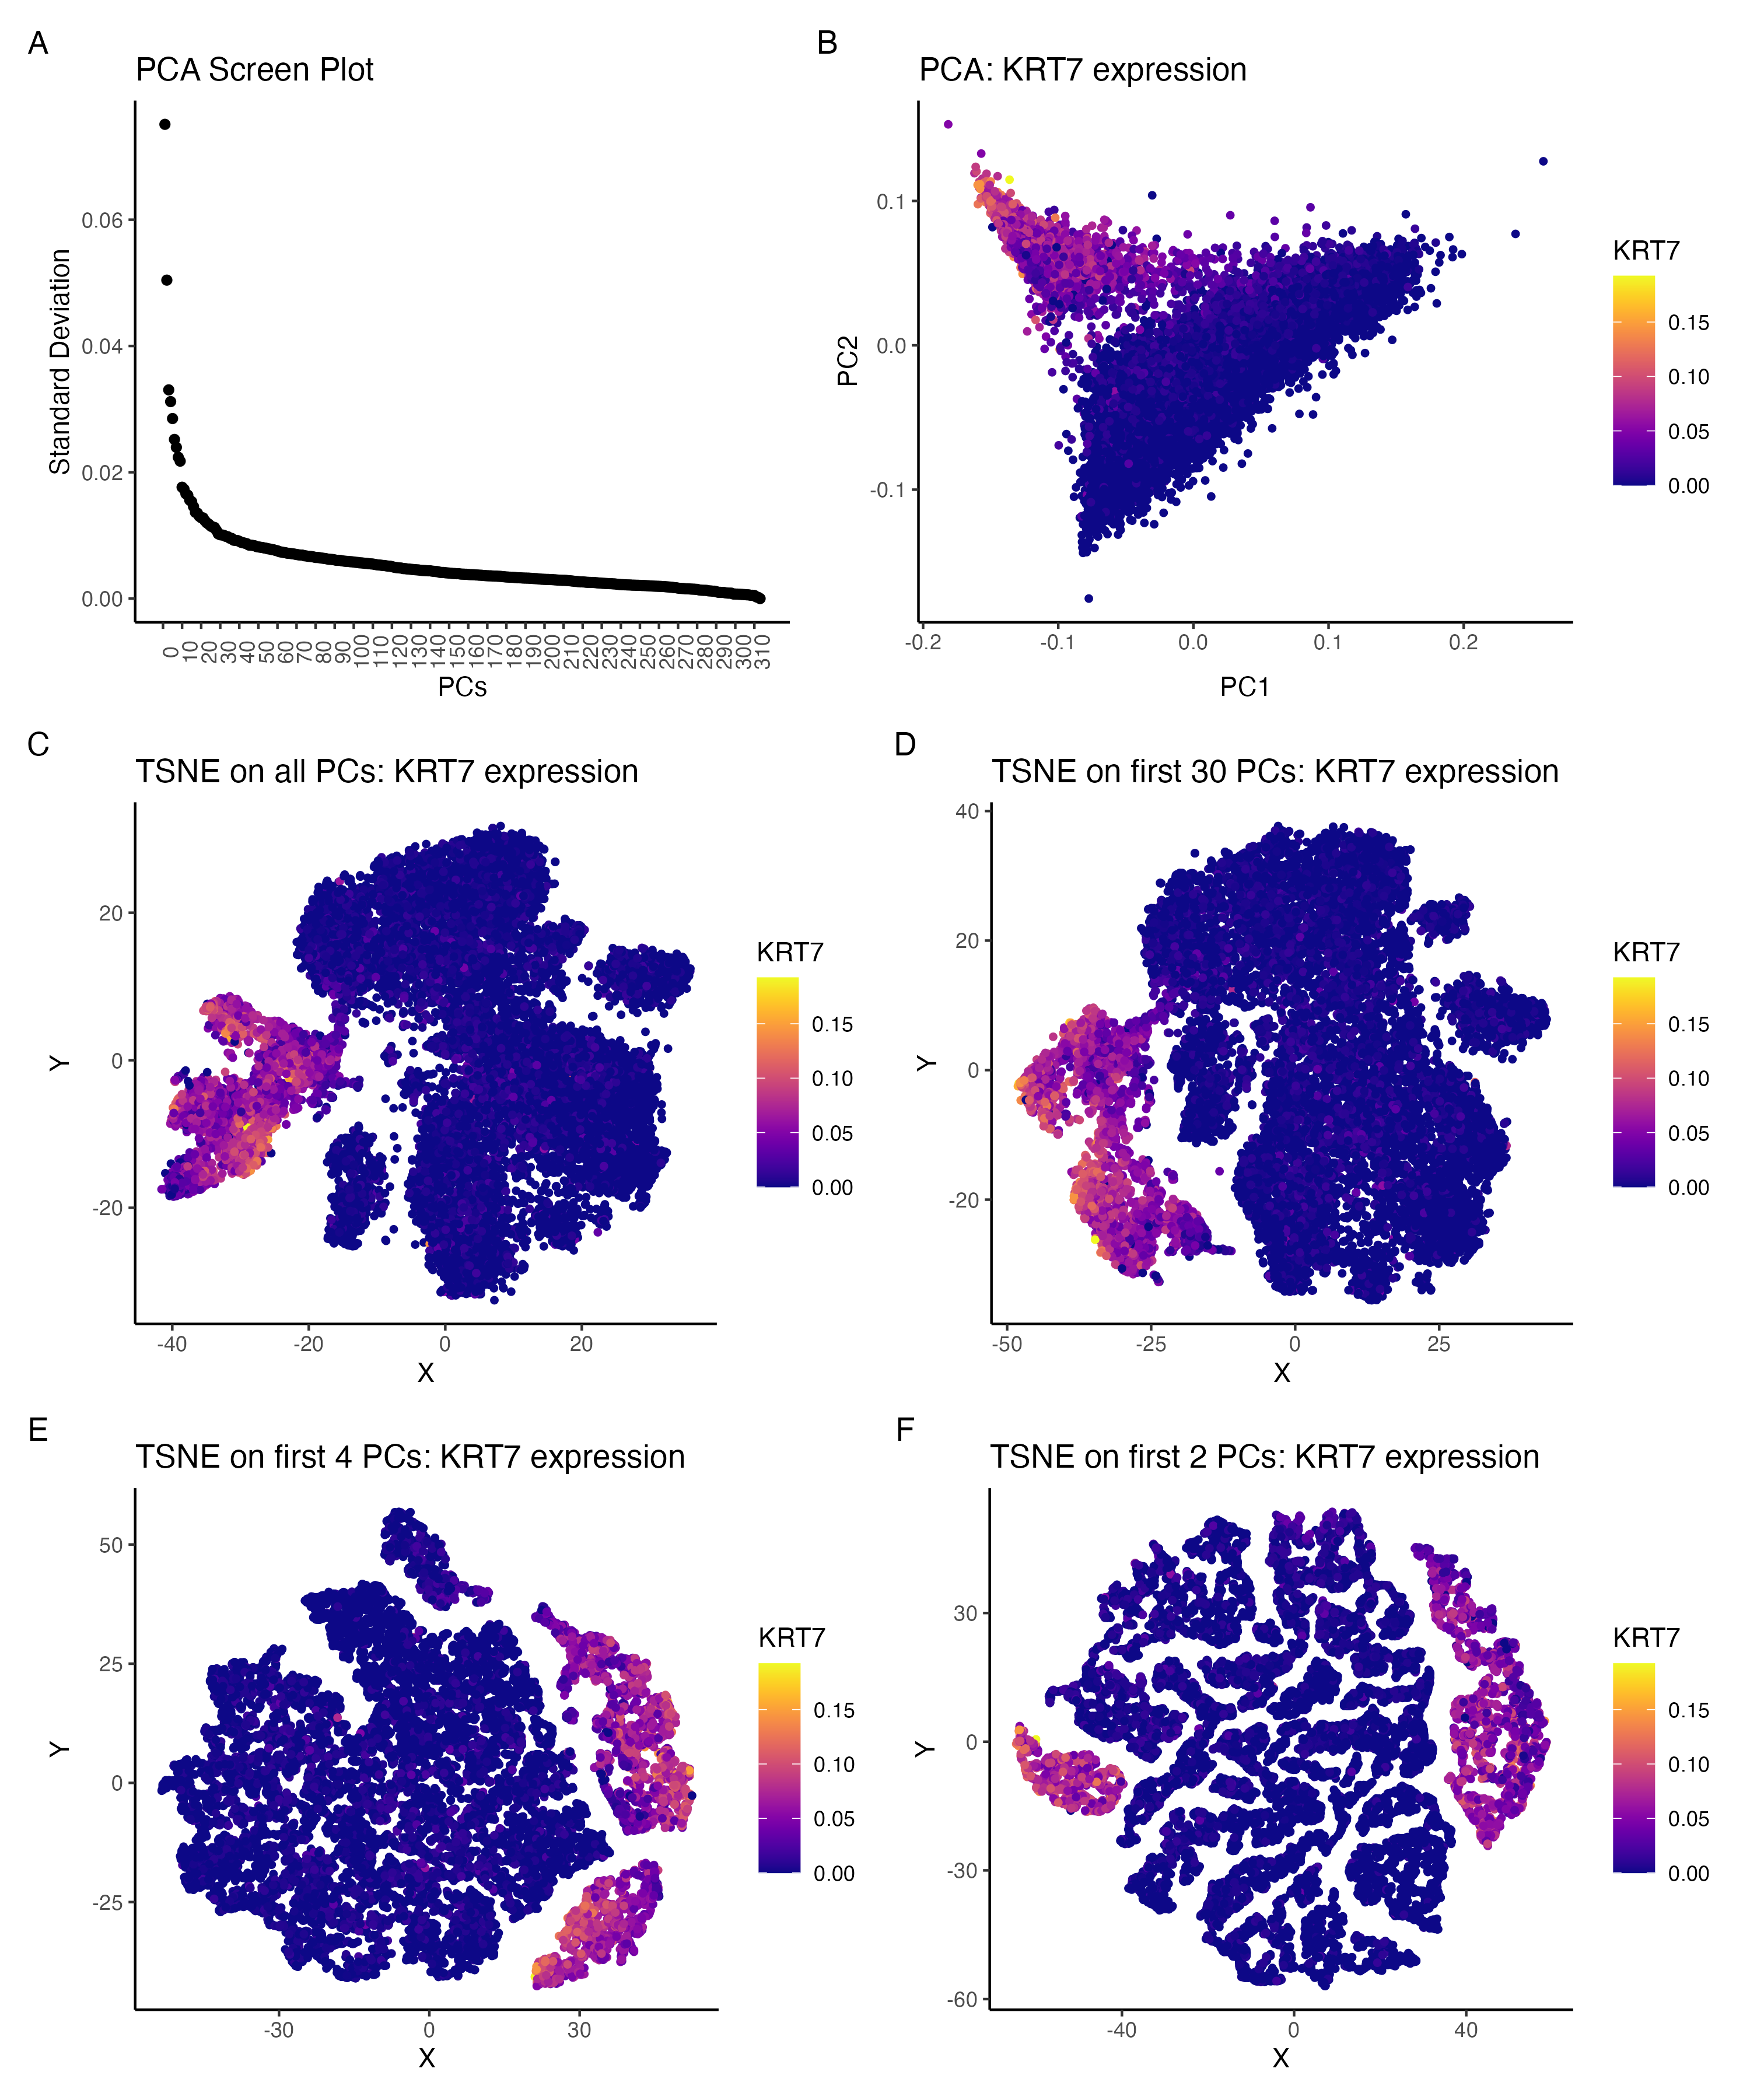 Comparing the effect of tSNE on varying number of PCs:KRT7 expression